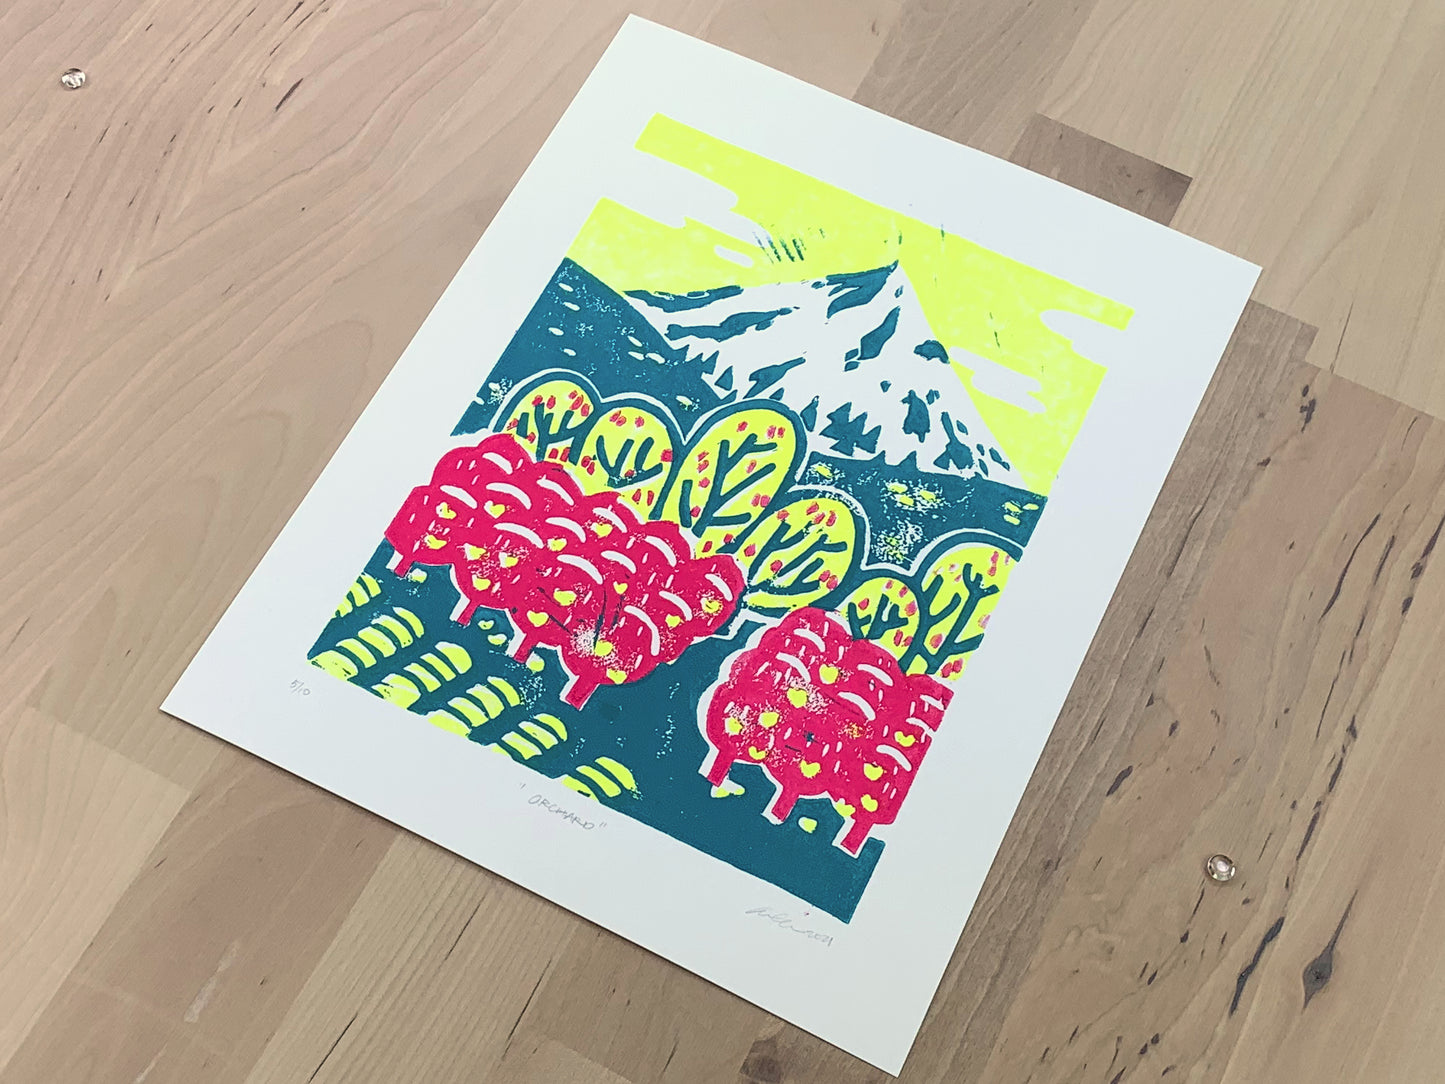 A different angle of one of the limited edition prints.